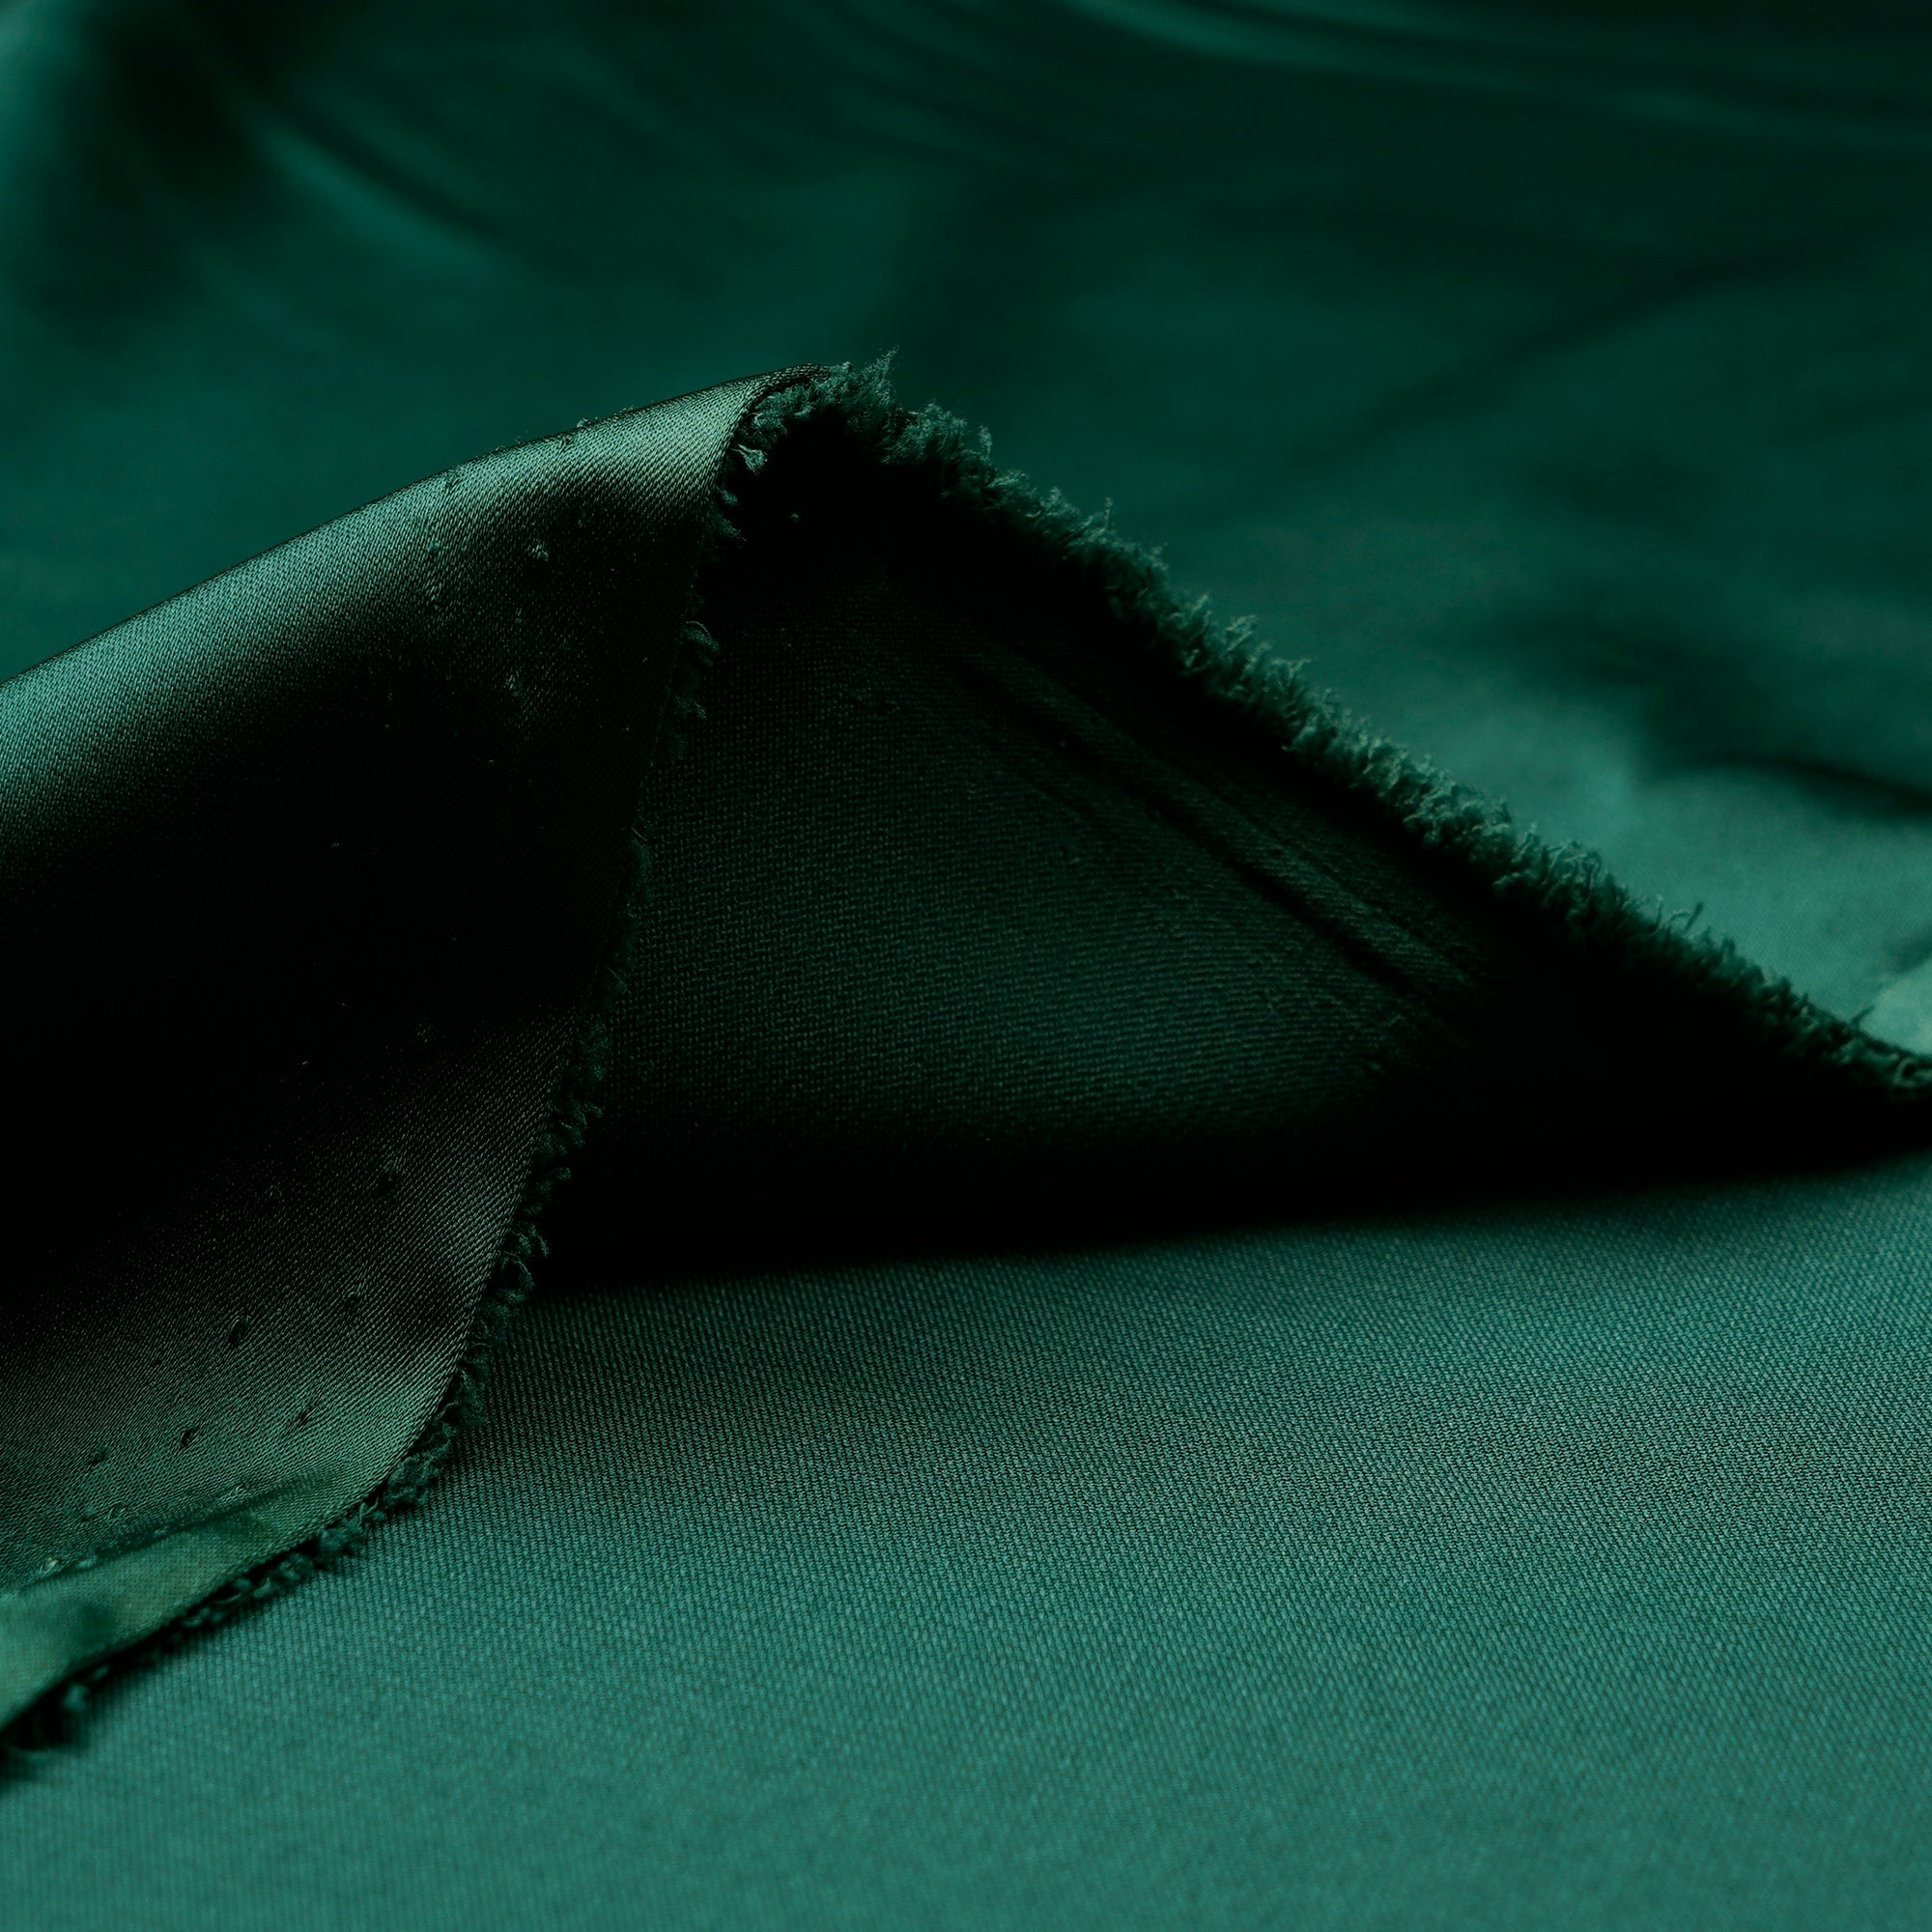 Dark Green Solid Dyed Imported Armani Satin Fabric (60" Width)